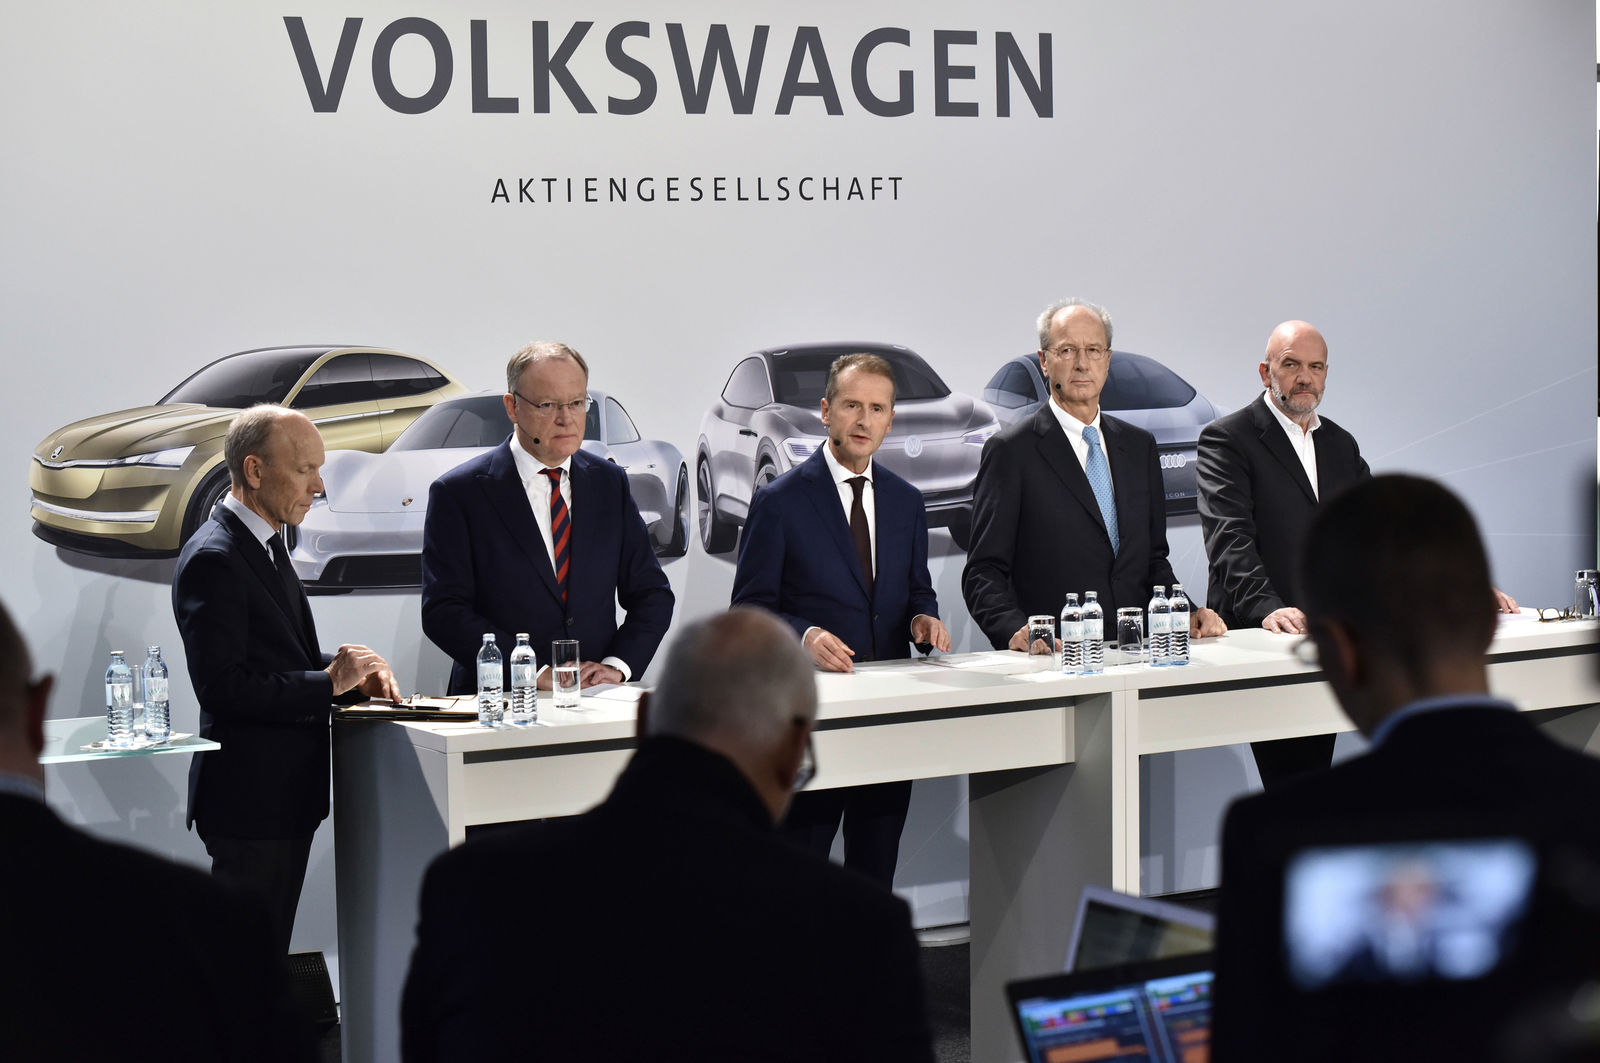 Volkswagen is investing in the future